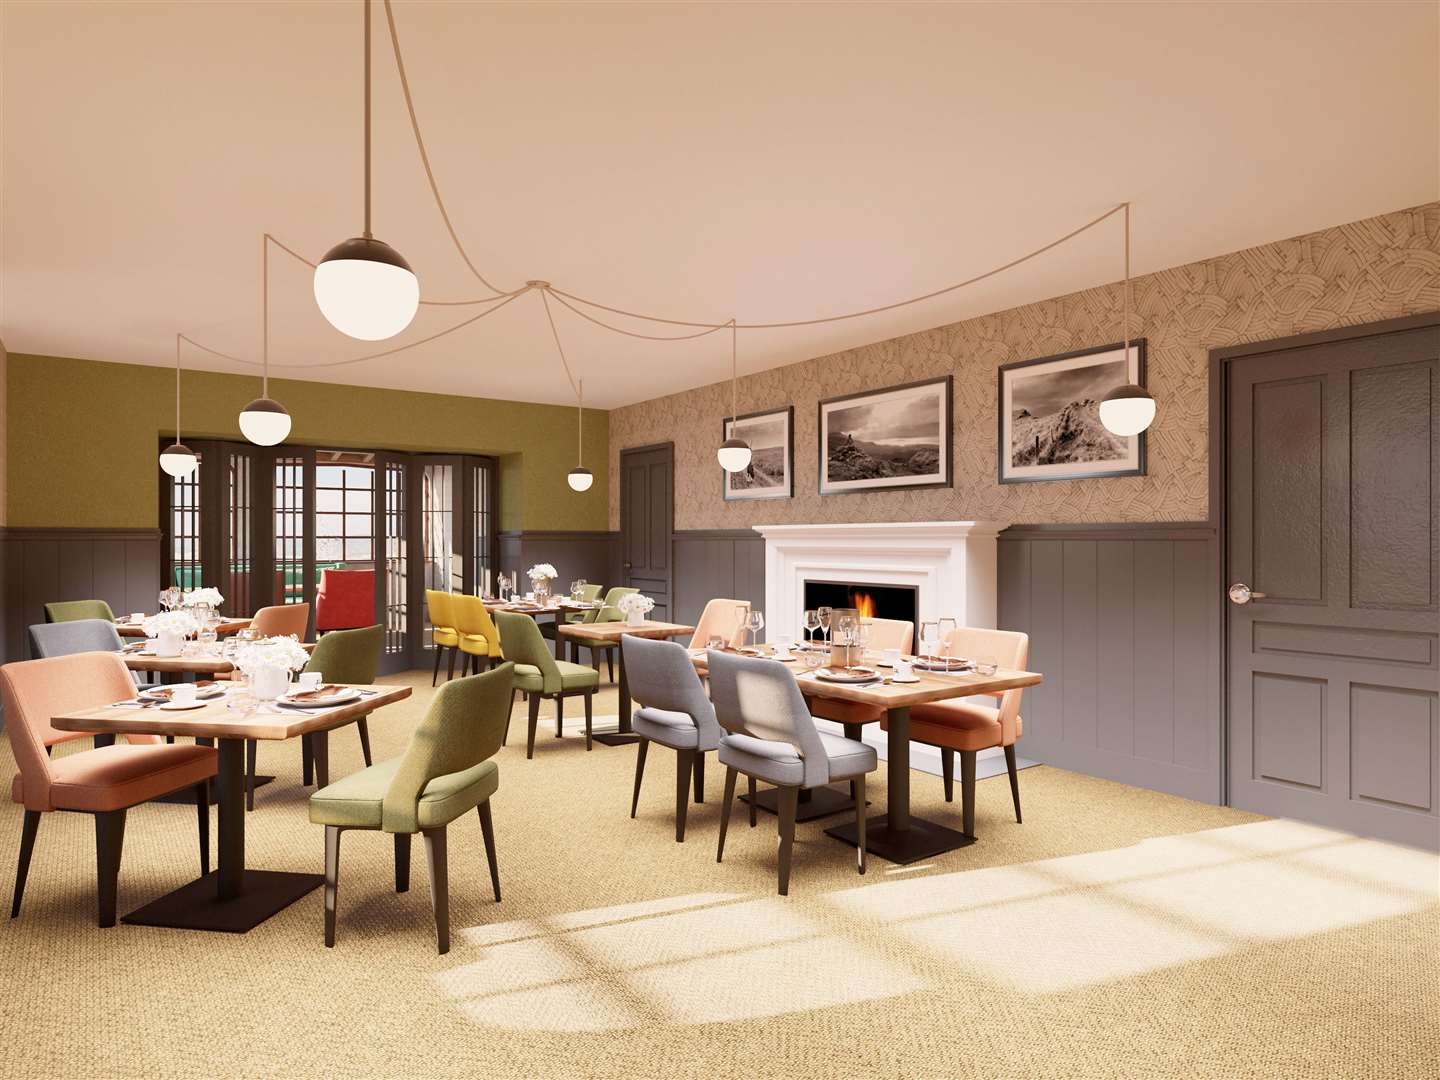 An image of how the 40-cover Varrich restaurant will look.